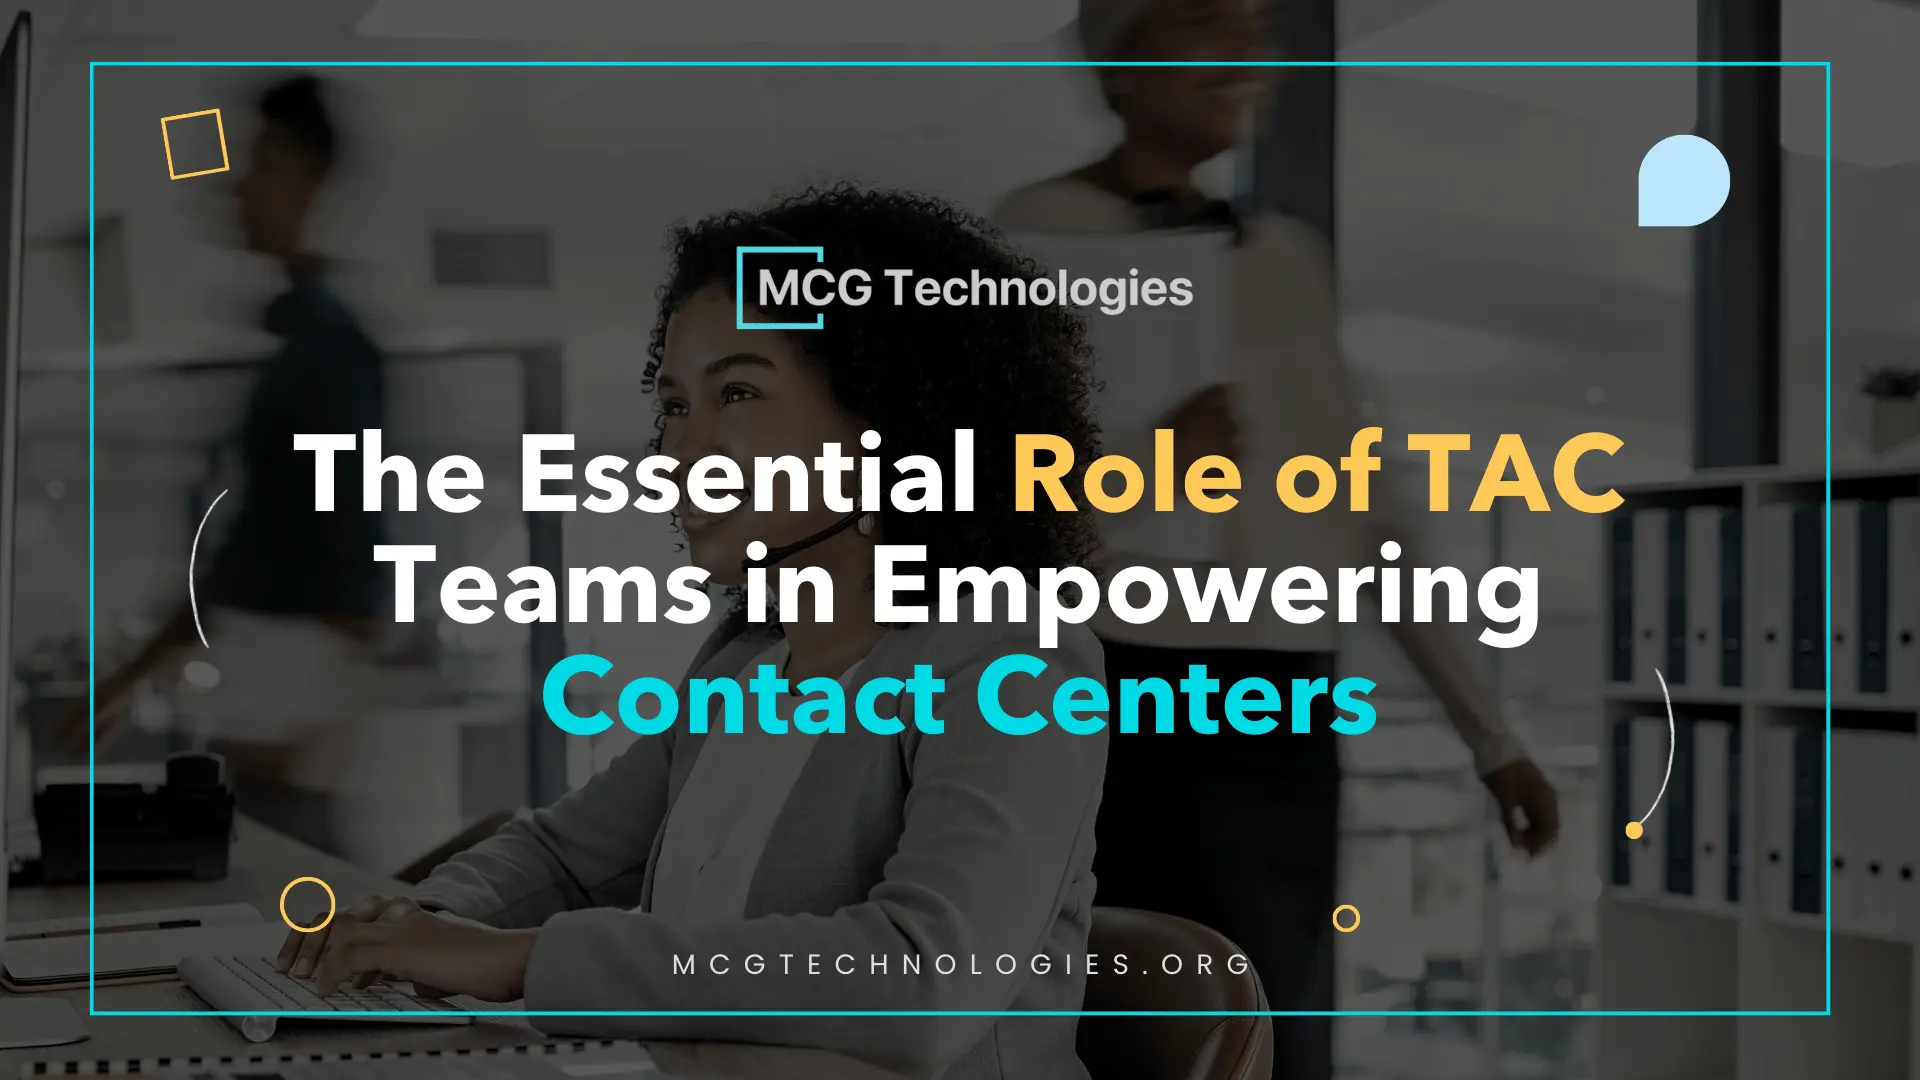 The Essential Role of TAC Teams in Empowering Contact Centers